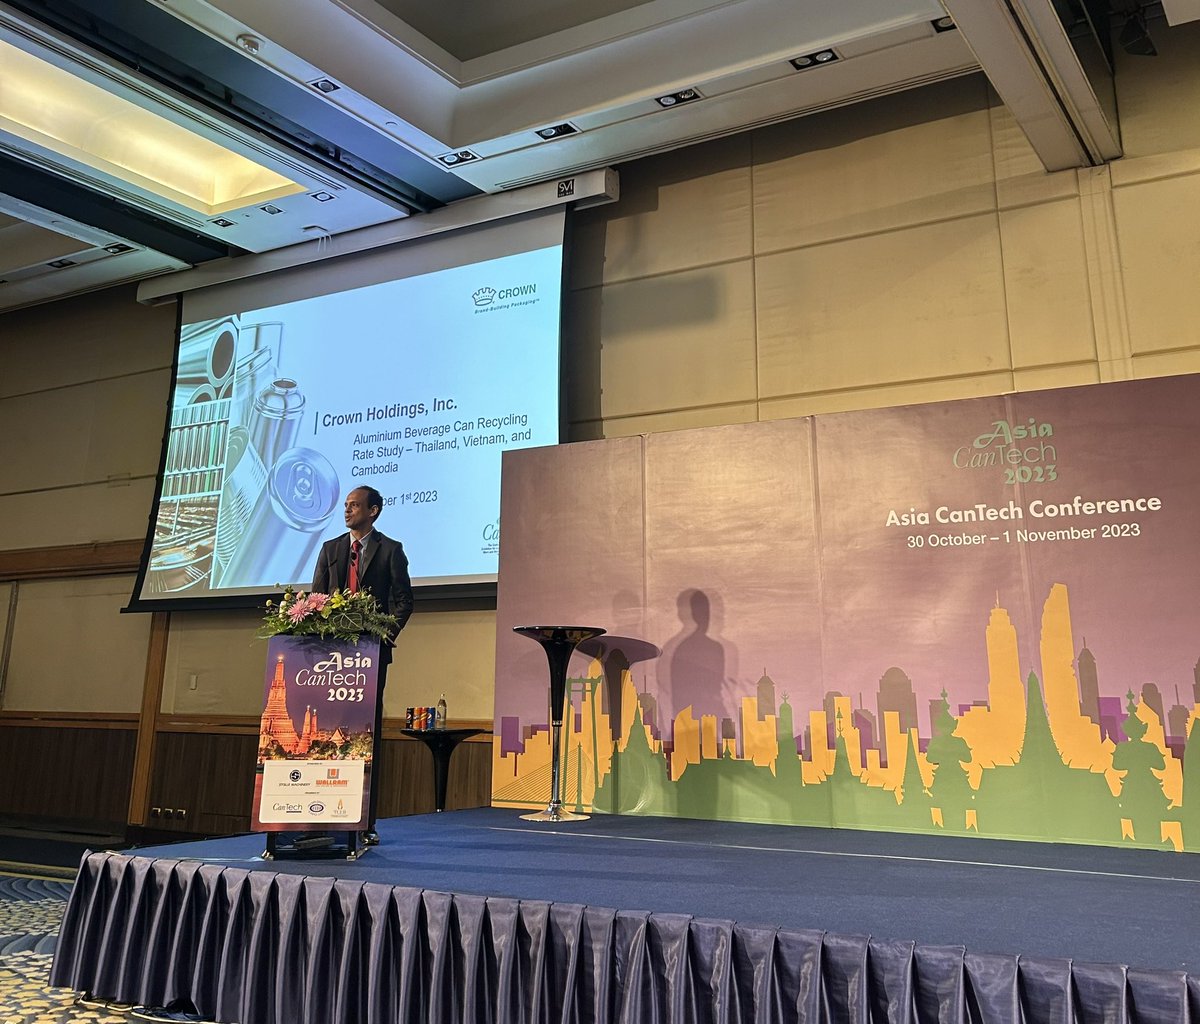 Our second keynote speaker of #AsiaCanTech2023 is Crown’s Adrine Thiban Arokiamsamy, who shares the results of a recent #aluminium beverage can study on #recycling rates in Thailand, Vietnam and Cambodia. Expect an insightful presentation! #beveragecans @LifeAtCrown